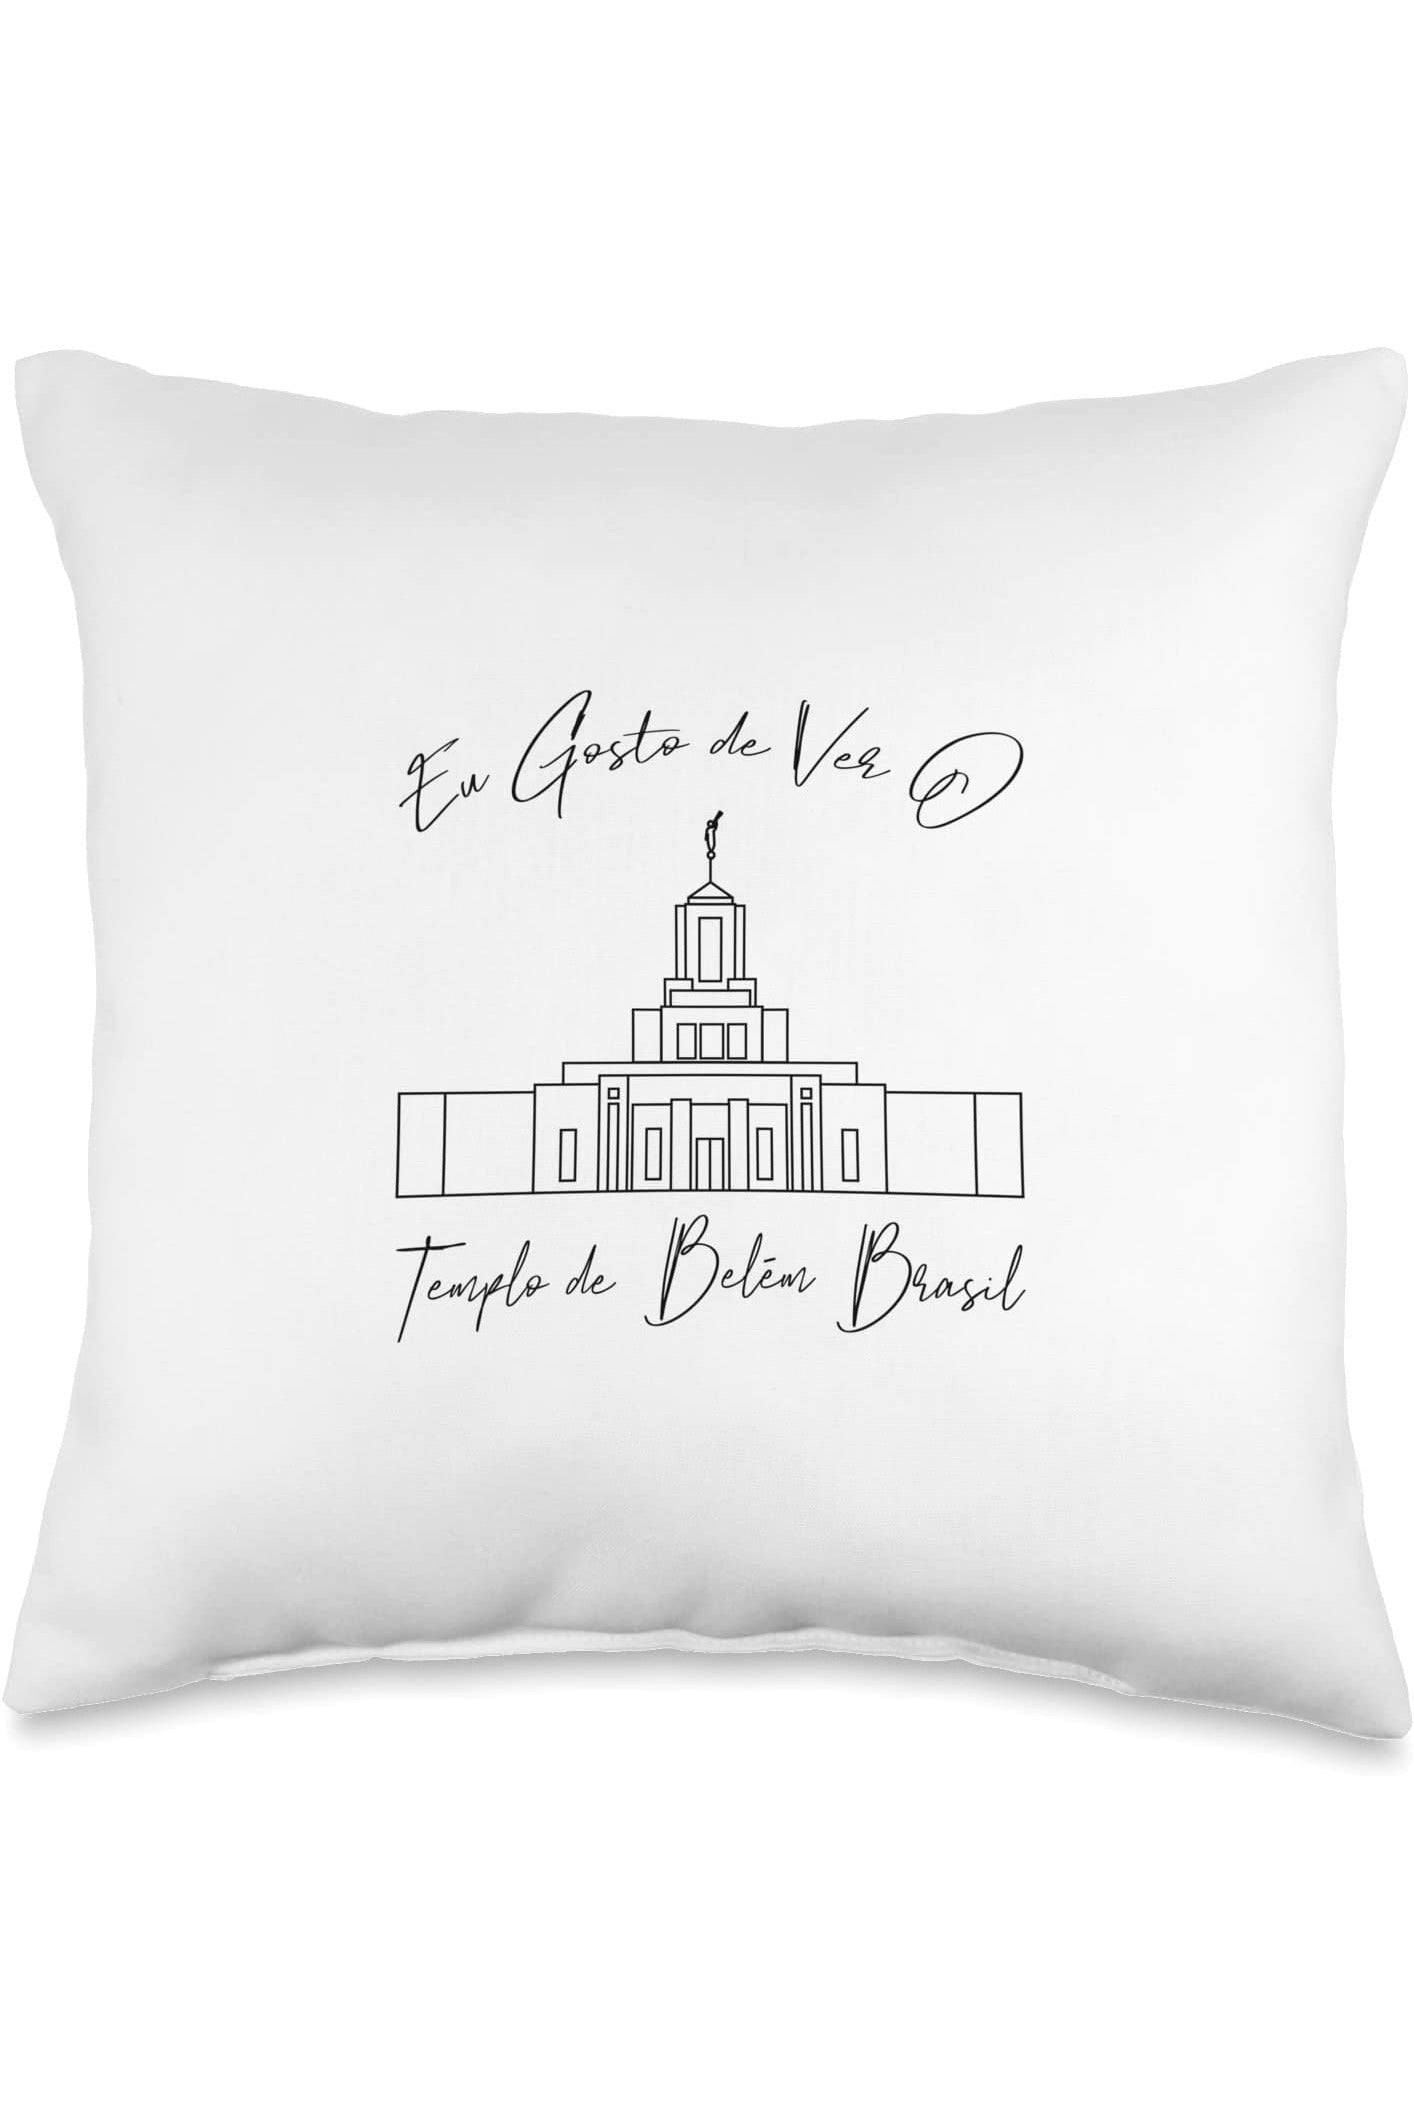 Belem Brazil Temple Throw Pillows - Calligraphy Style (Portuguese) US